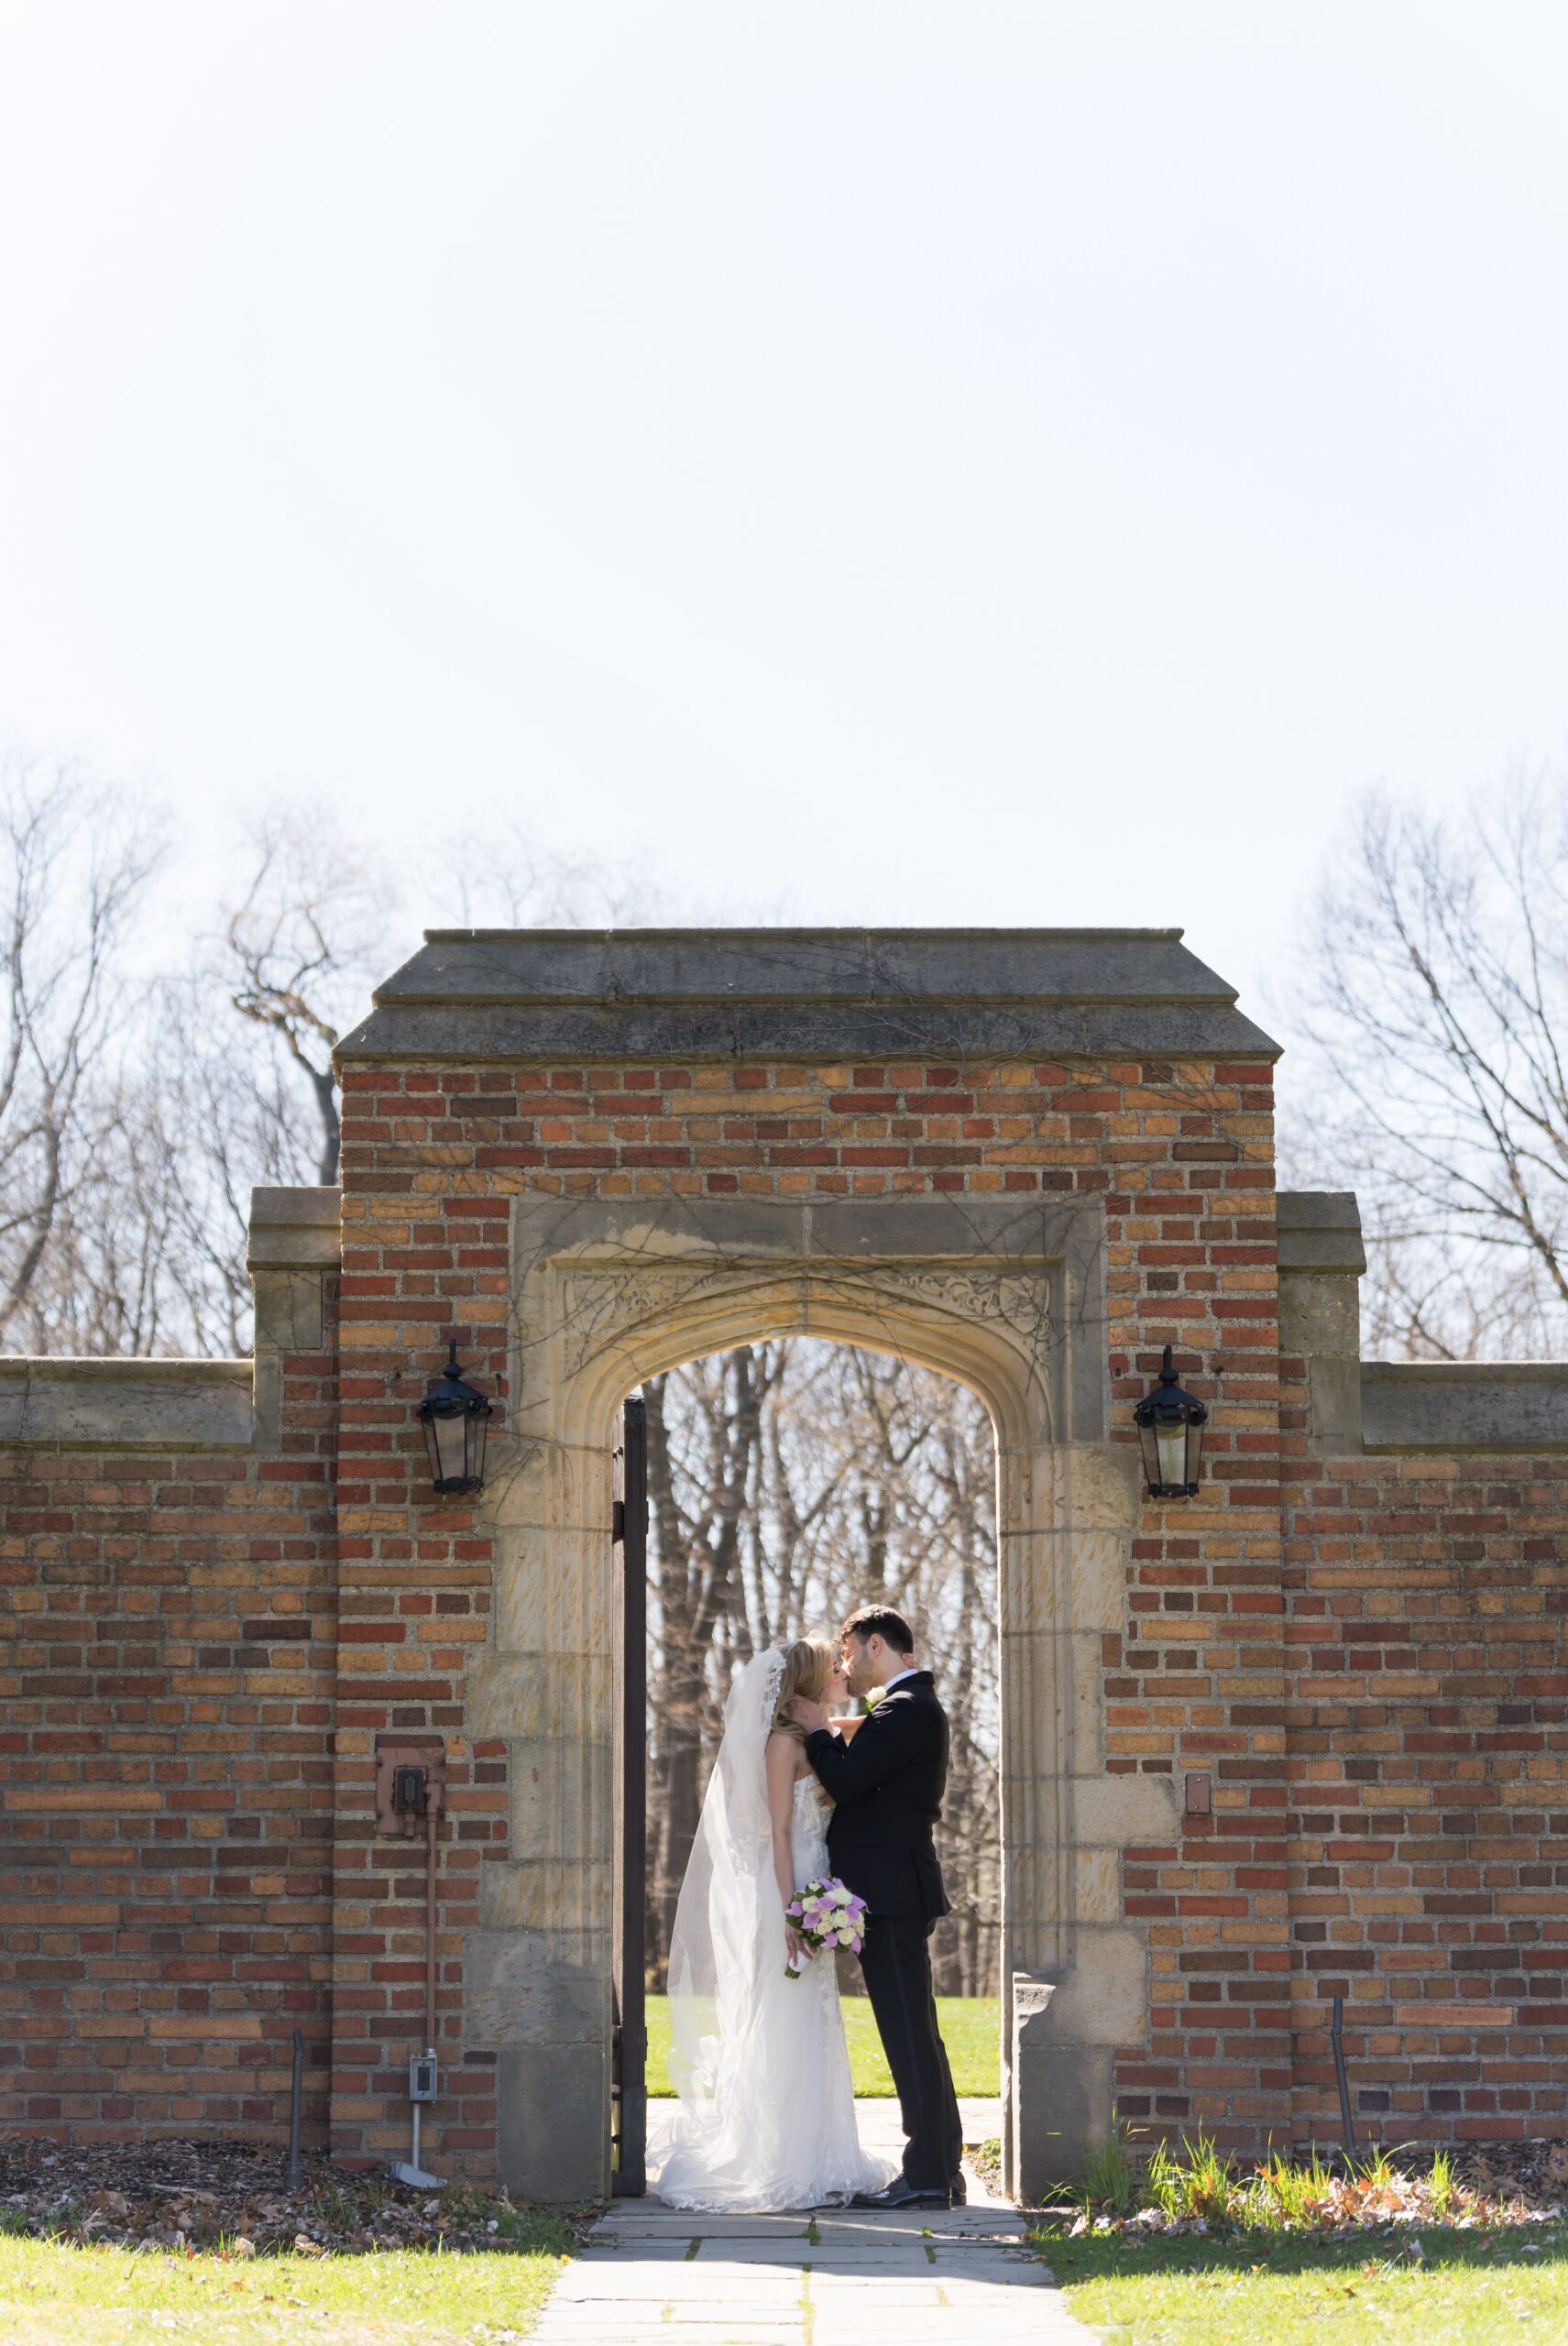 A bride and groom kiss under an arched doorway at their Meadowbrook wedding.  